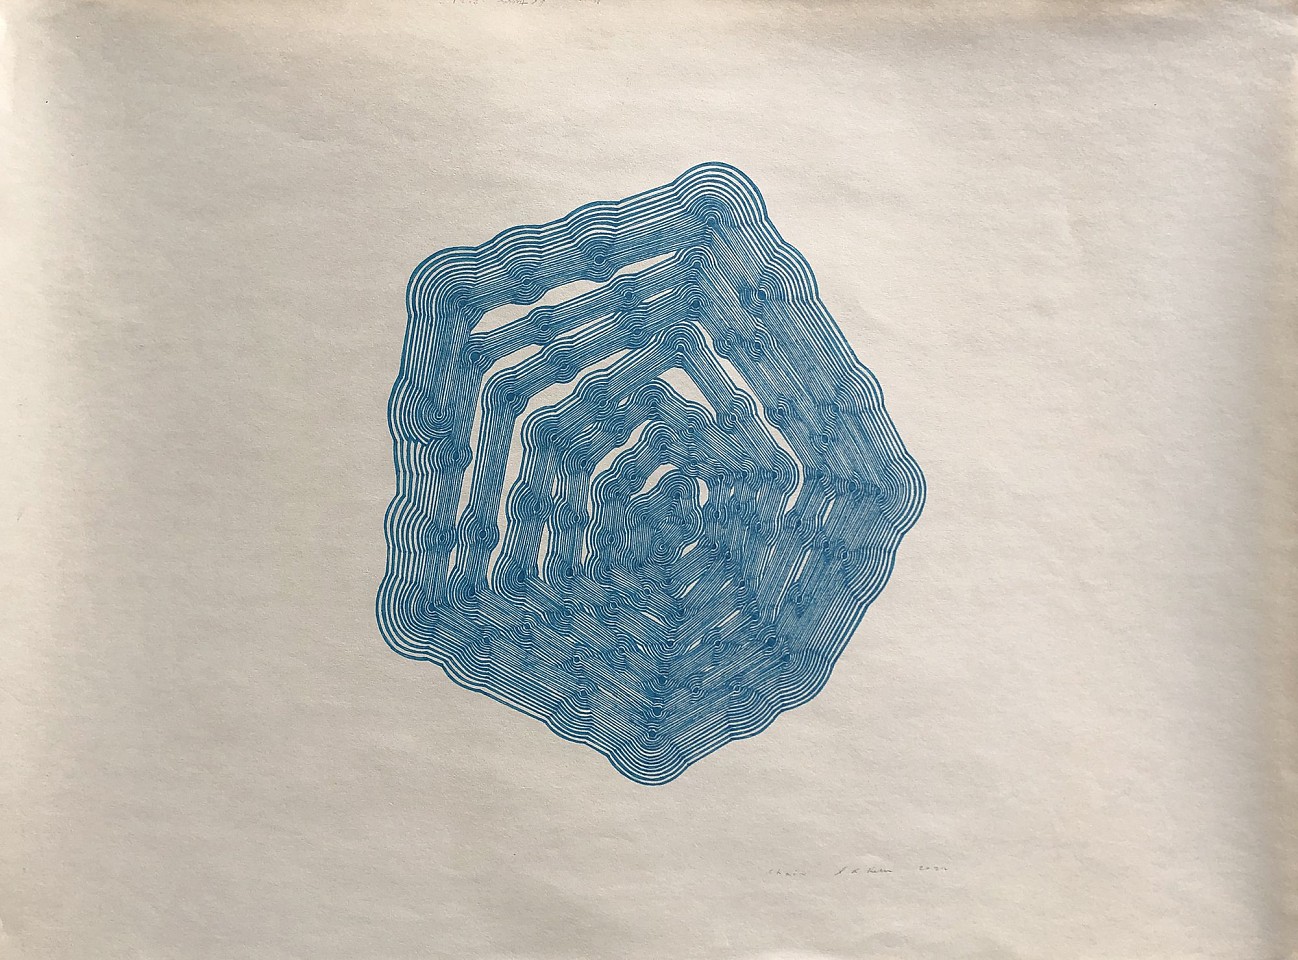 Stewart Helm, Blue Chain, 2022
Blue ink on paper, 19.5"x 27.5"
SH-648
Price Upon Request